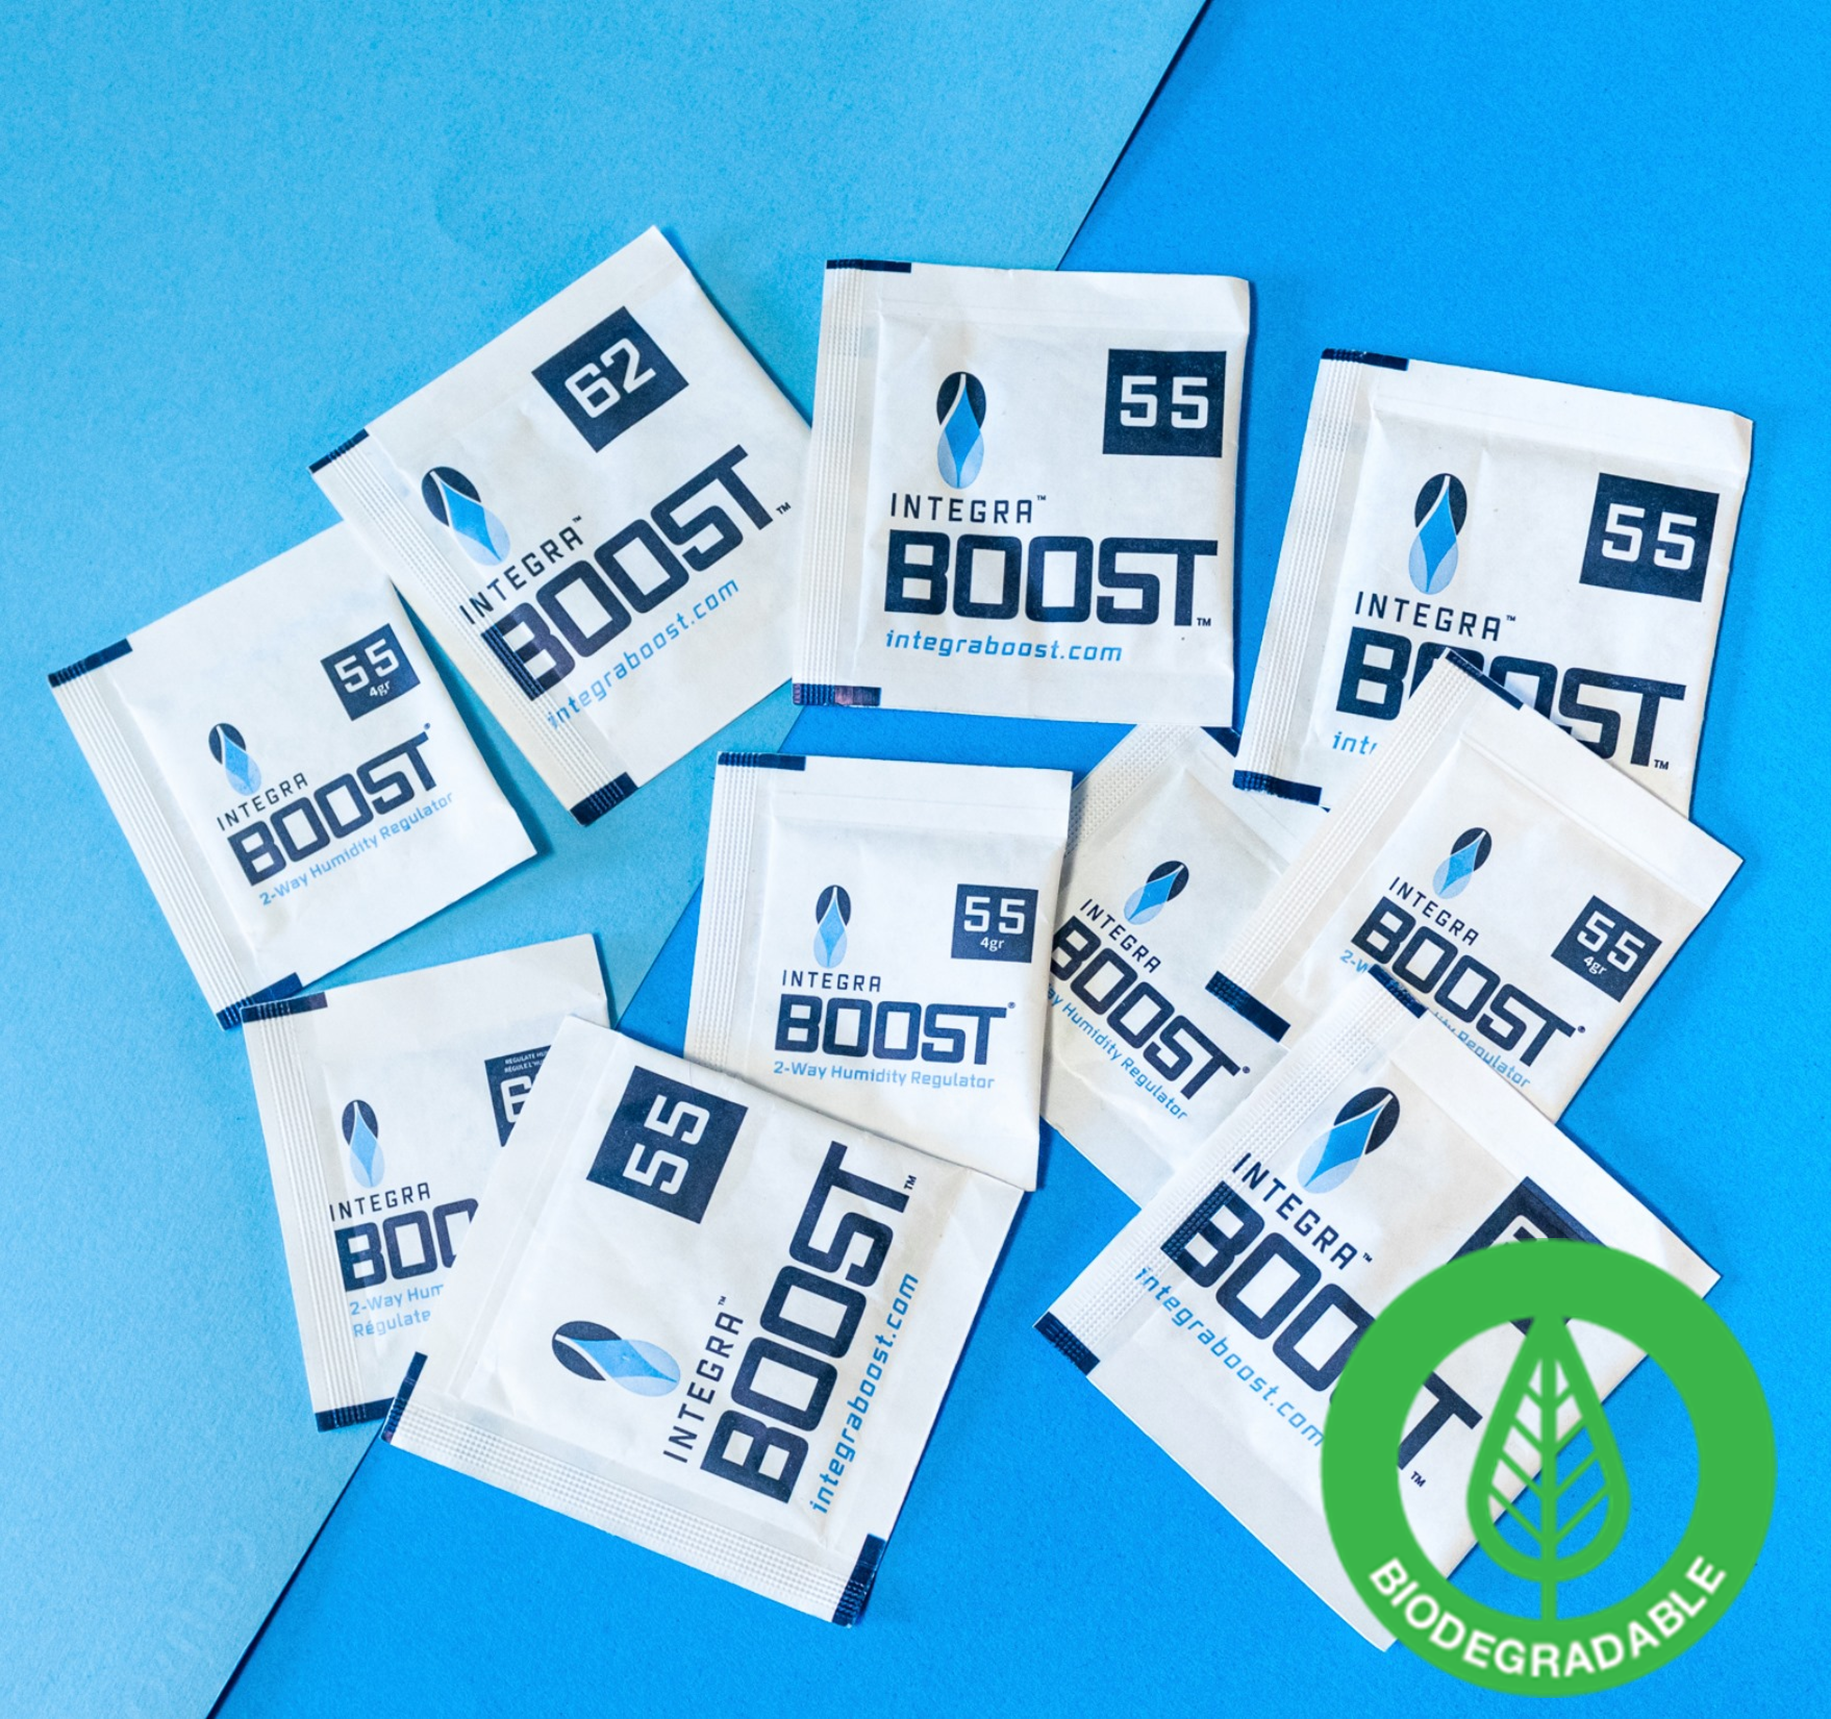 Preserve, prolong and protect herbal medicines, tobacco and pantry supplies! Desiccare 8-gram bulk packed Integra BOOST® 2-way humidity control packs are available in 62% RH, 69% RH and 72% RH styles and are FDA-compliant, 99% biodegradable, non-toxic and salt free